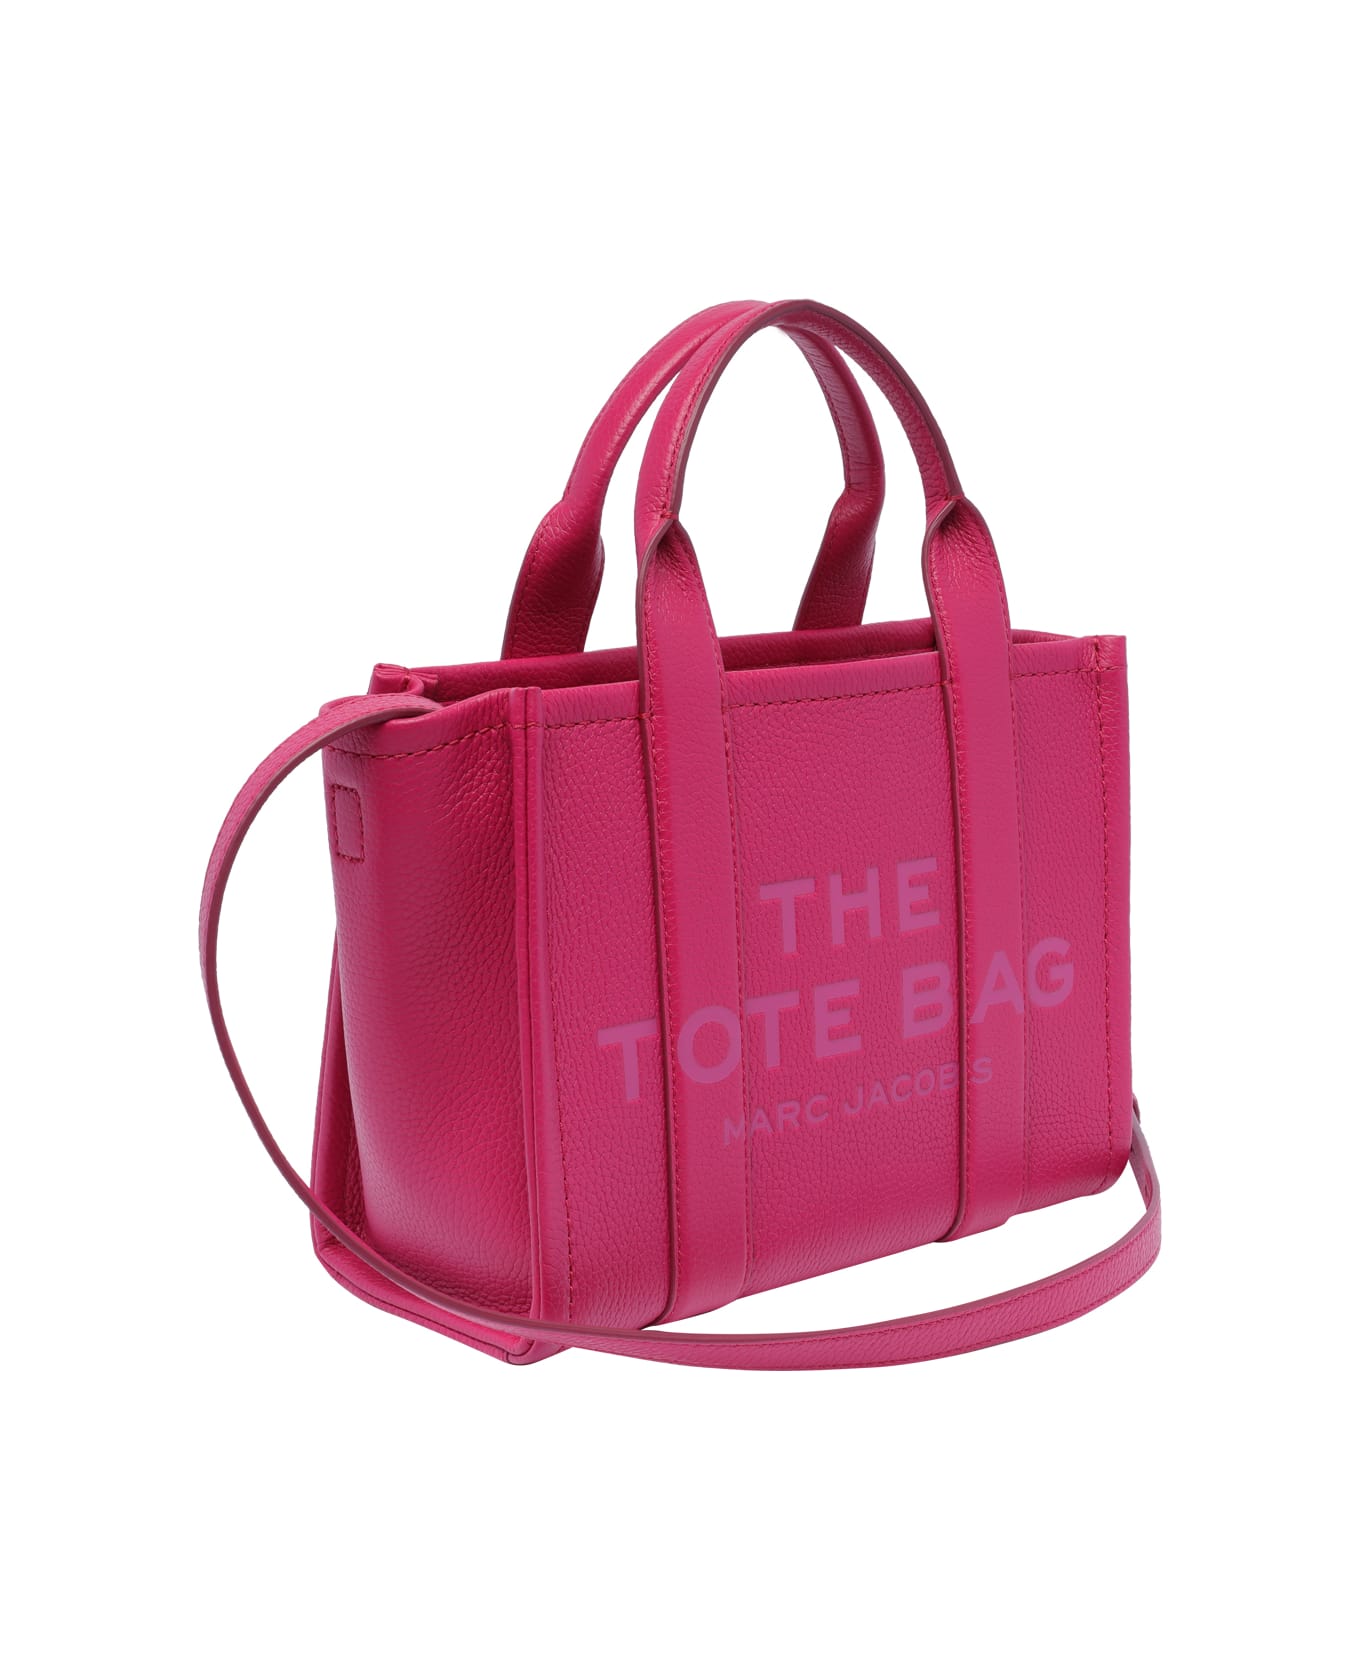 Marc Jacobs The Small Tote Bag - Lipstick Pink